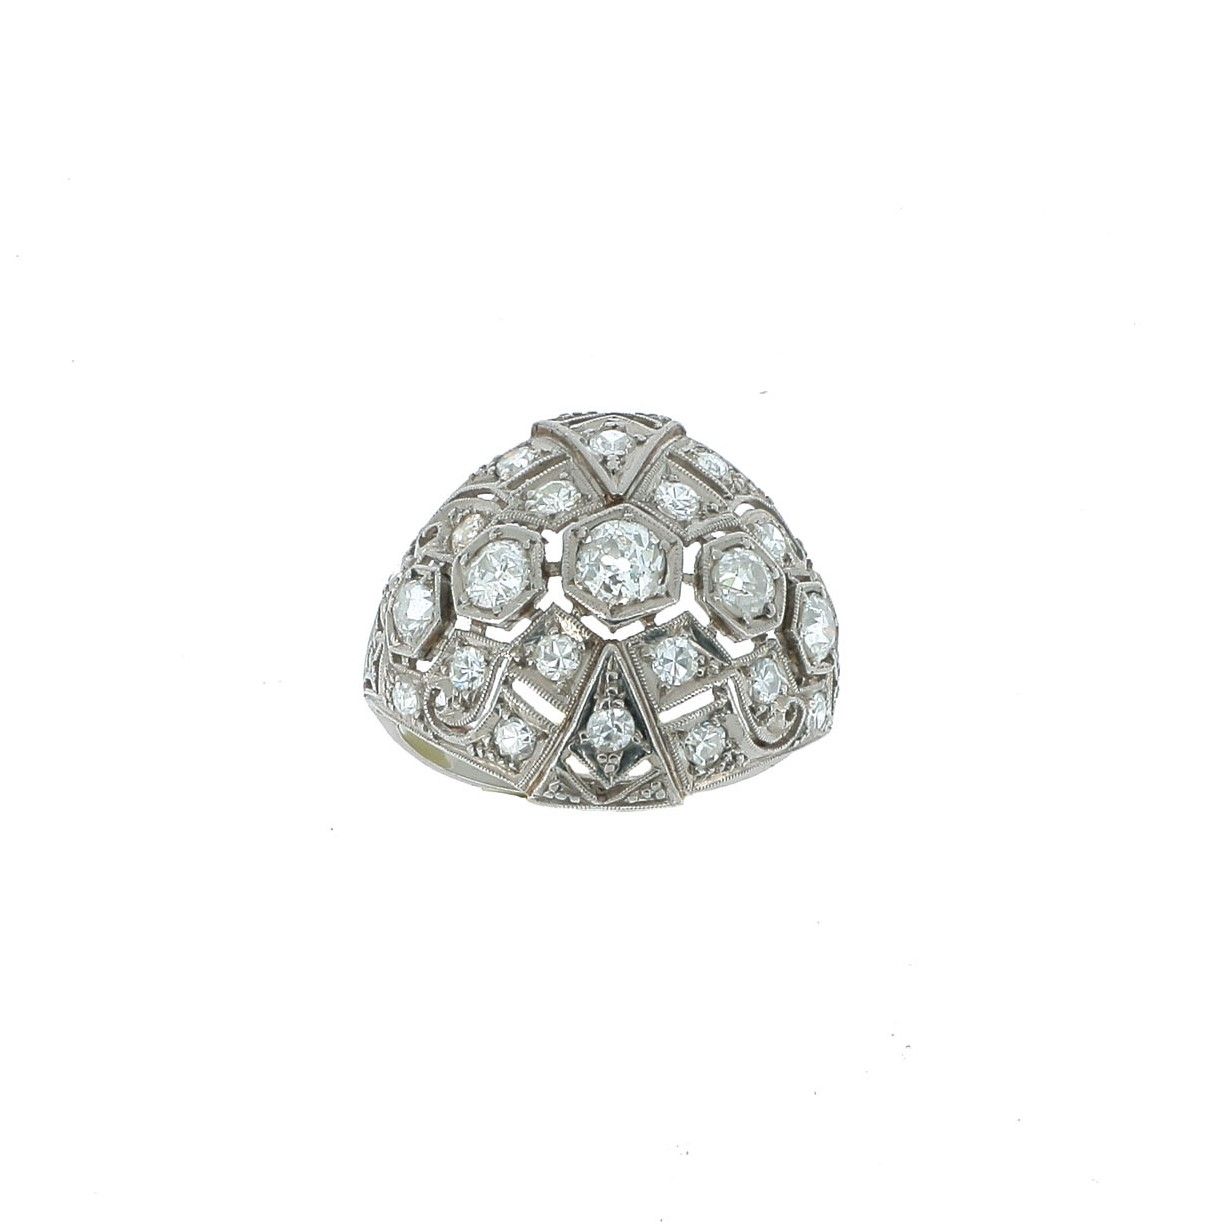 Null BOMBED RING

in platinum, with openwork geometrical motifs, set with diamon&hellip;